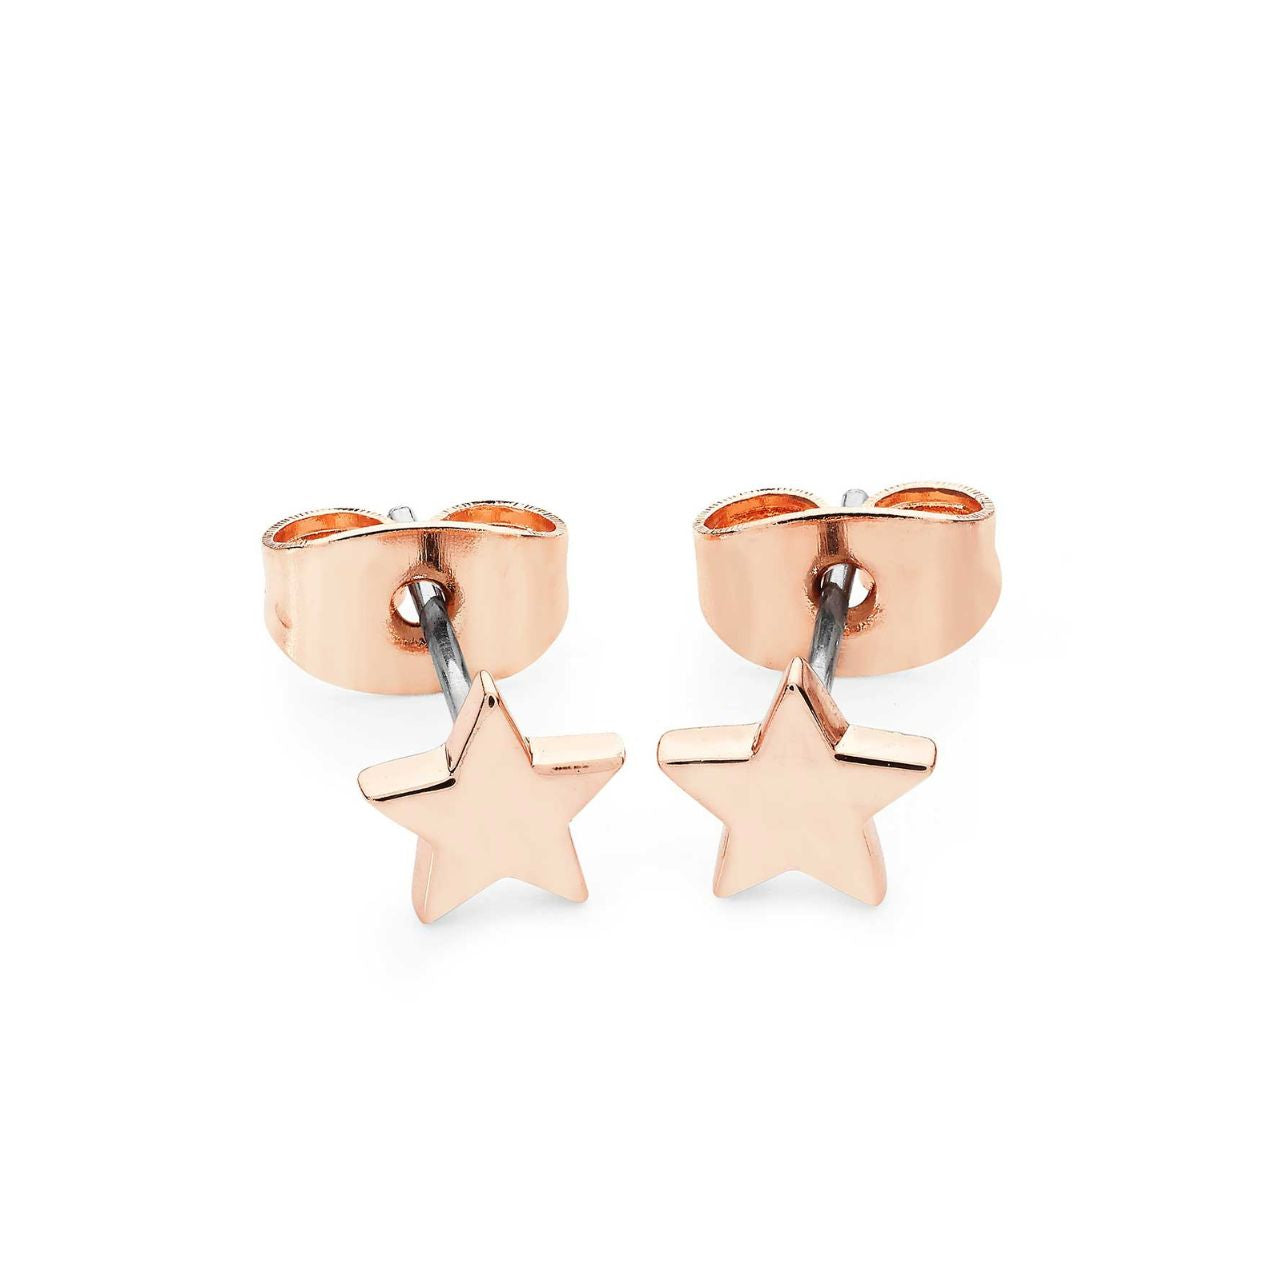 Star Mini Stud Earrings Rose Gold by Tipperary  These dainty stud earrings are sweet and simple. Crafted in polished metal they are available in rose gold, champagne gold and silver and secure safely with pushbacks.